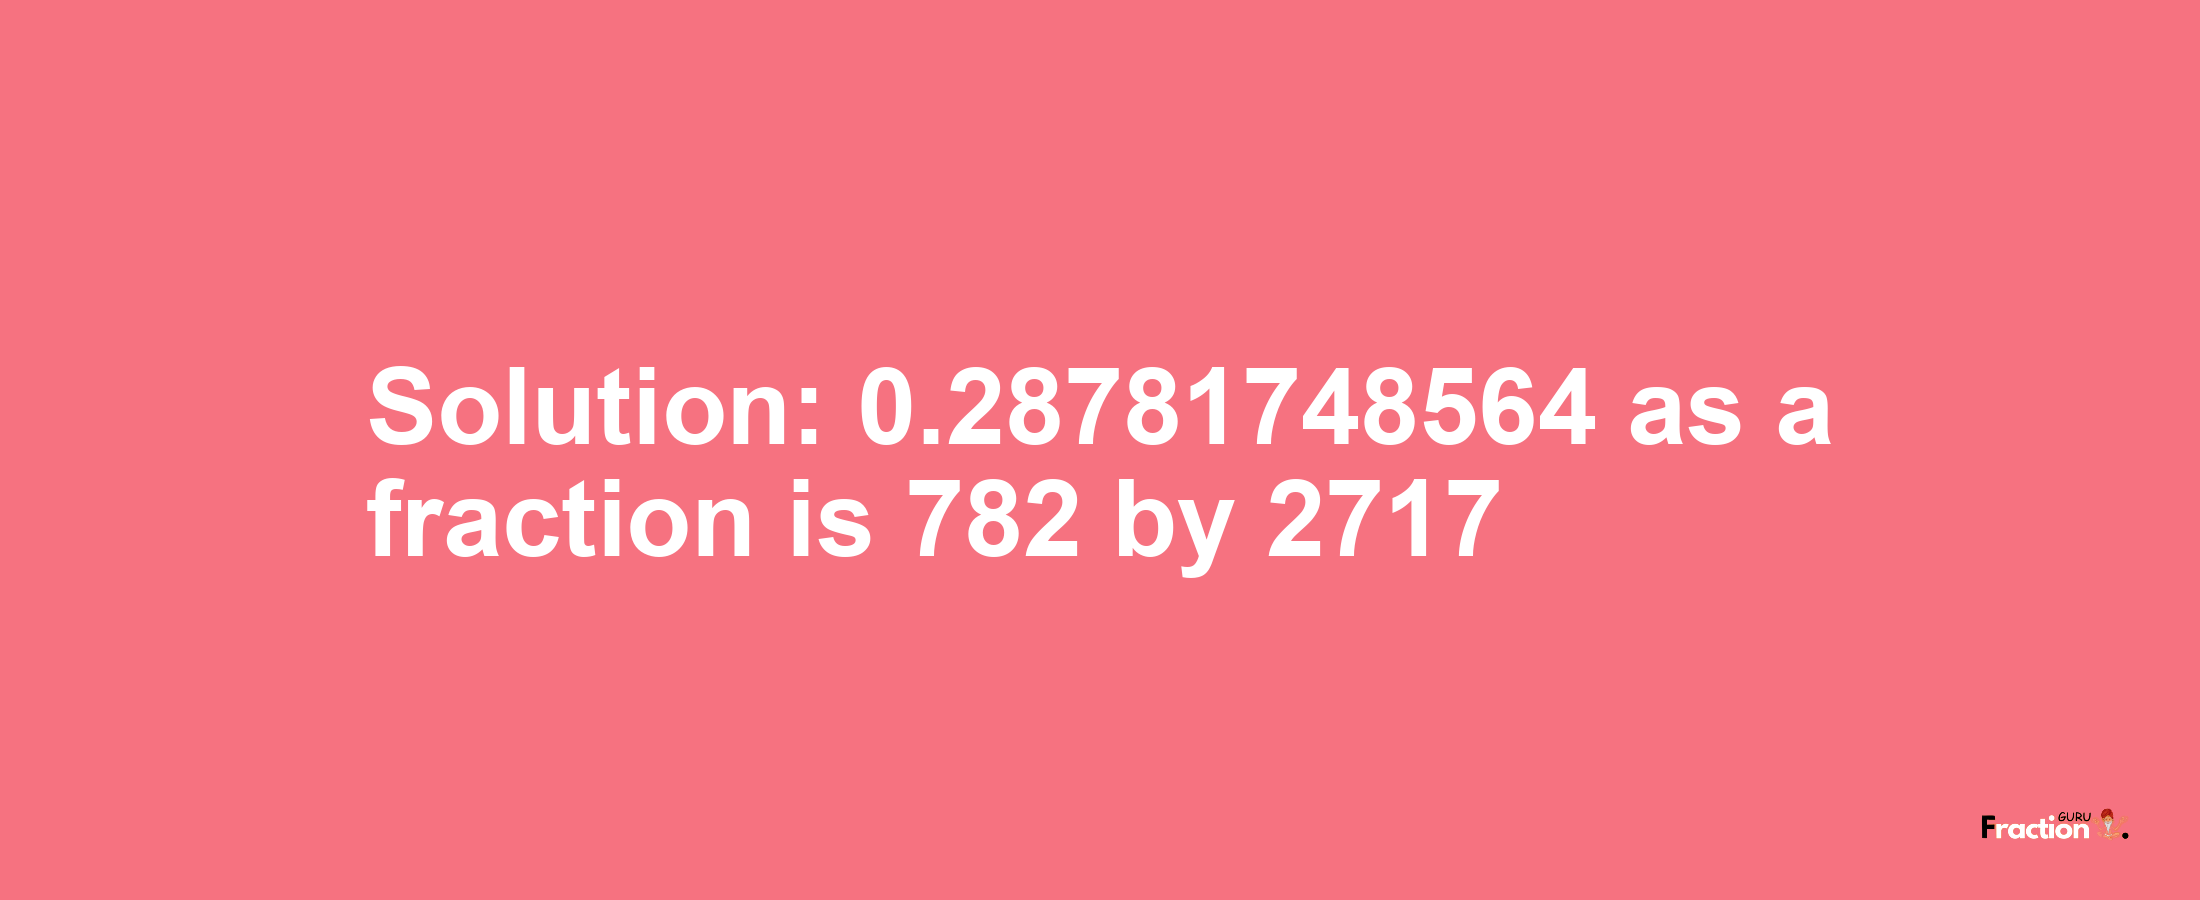 Solution:0.28781748564 as a fraction is 782/2717